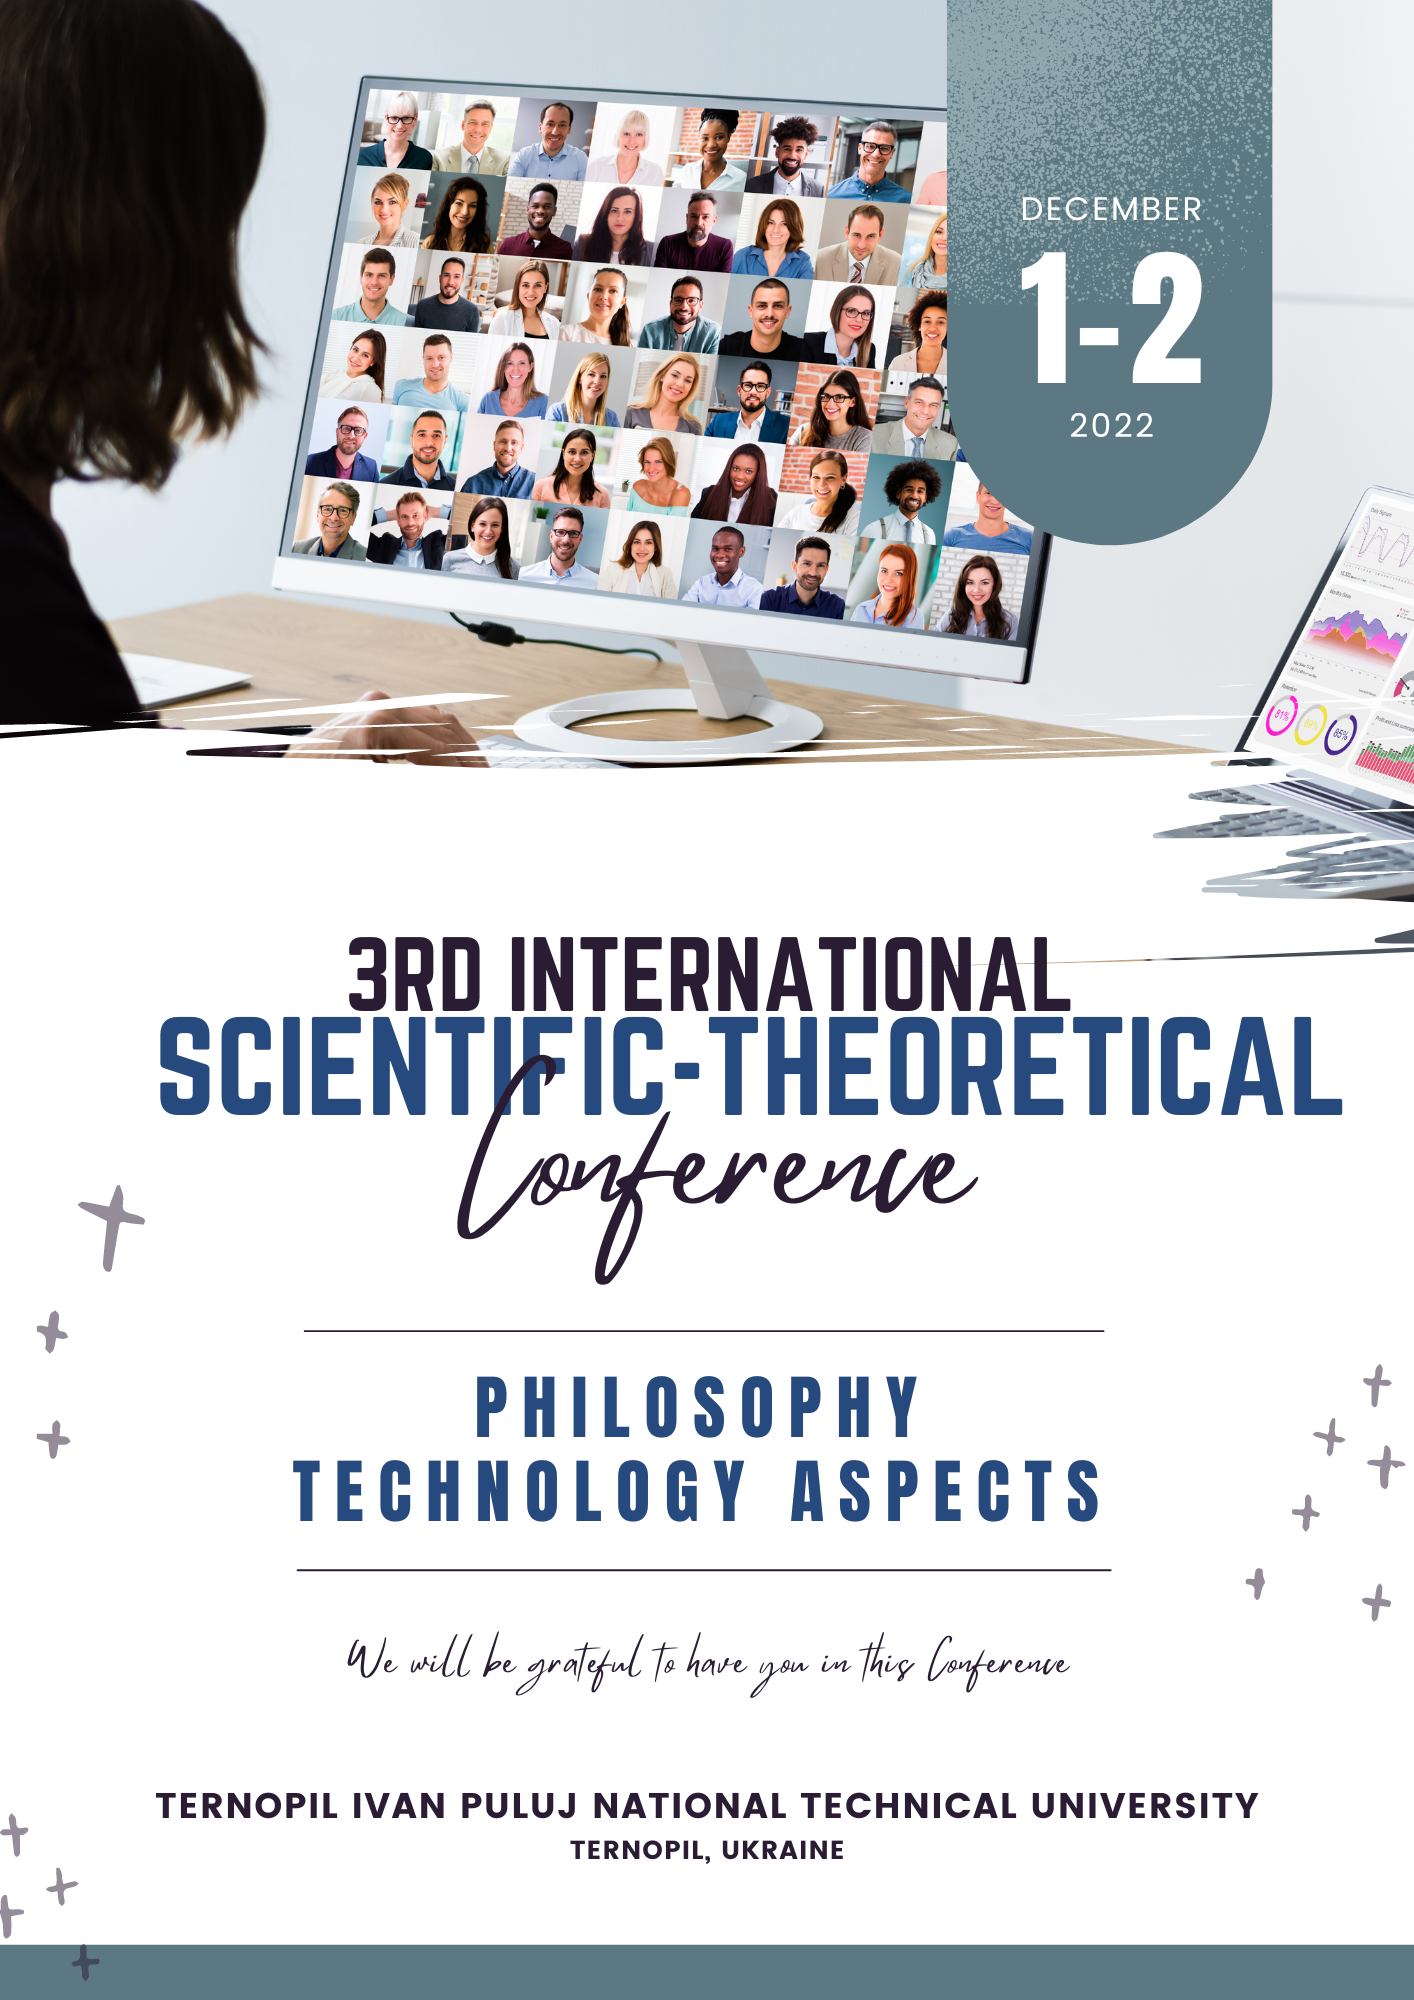 Theoretical Conference of young scientists and students “PHILOSOPHY TECHNOLOGY ASPECTS”